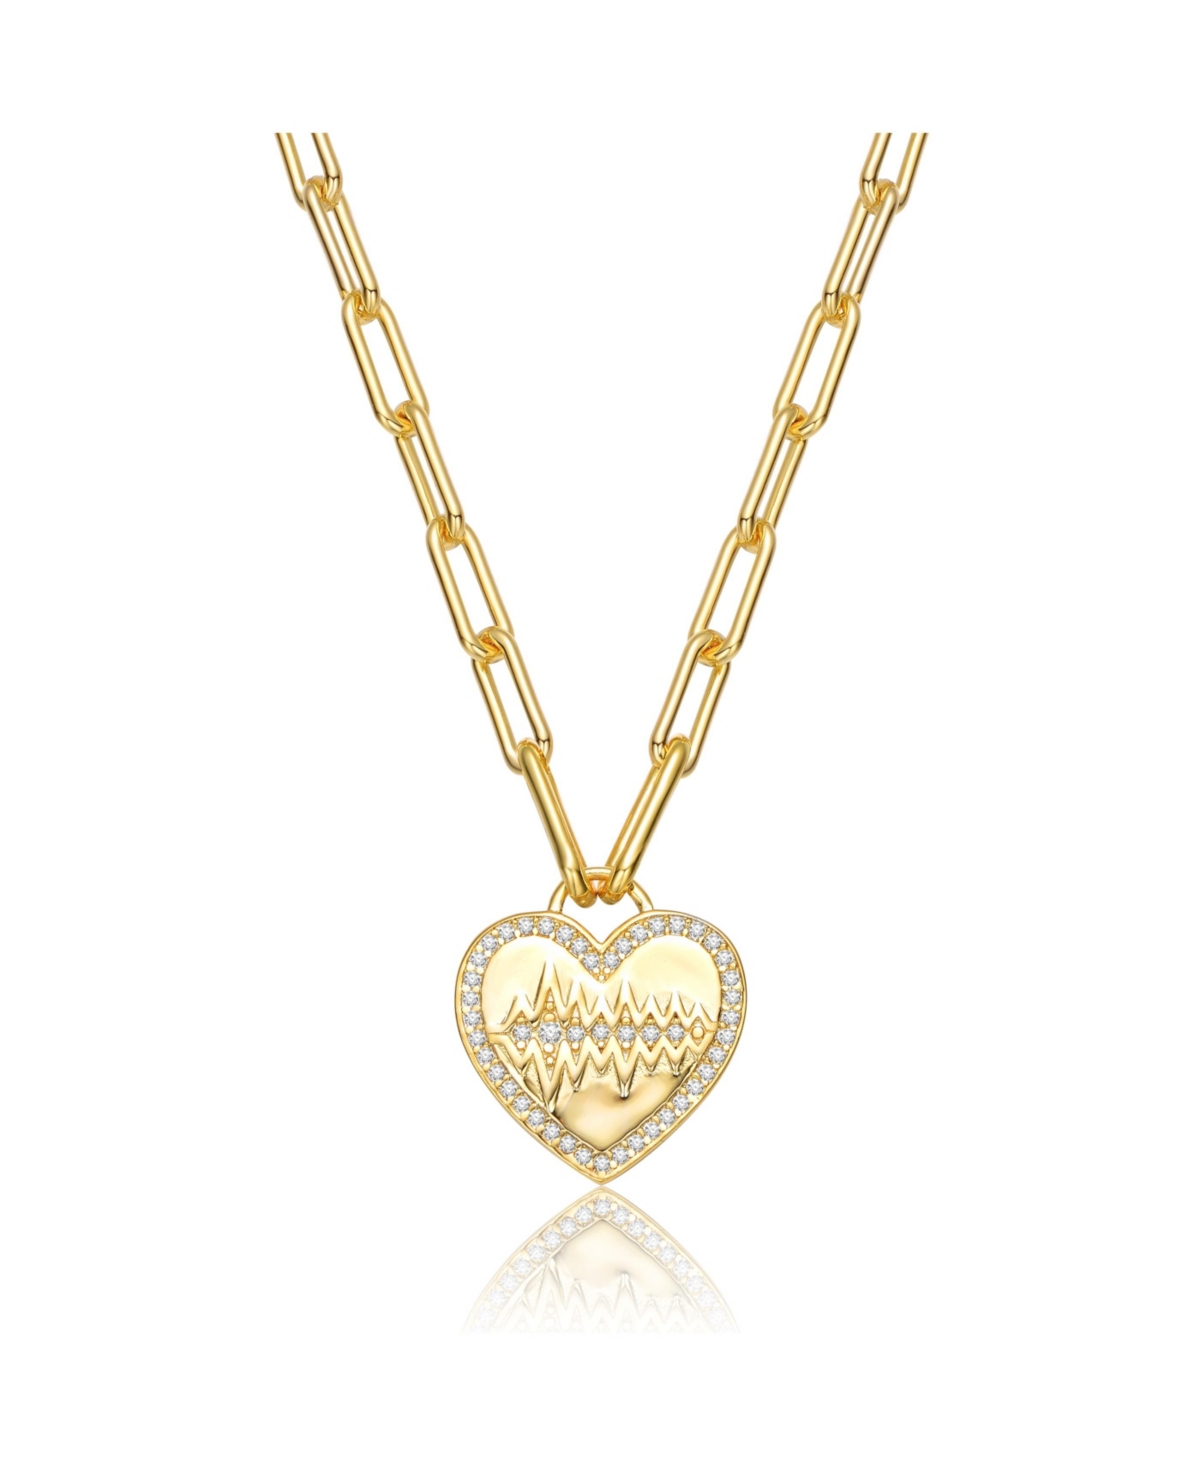 Chic Teens/Young Adults 14K Gold Plated Cubic Zirconia Heart Charm Necklace - Gold